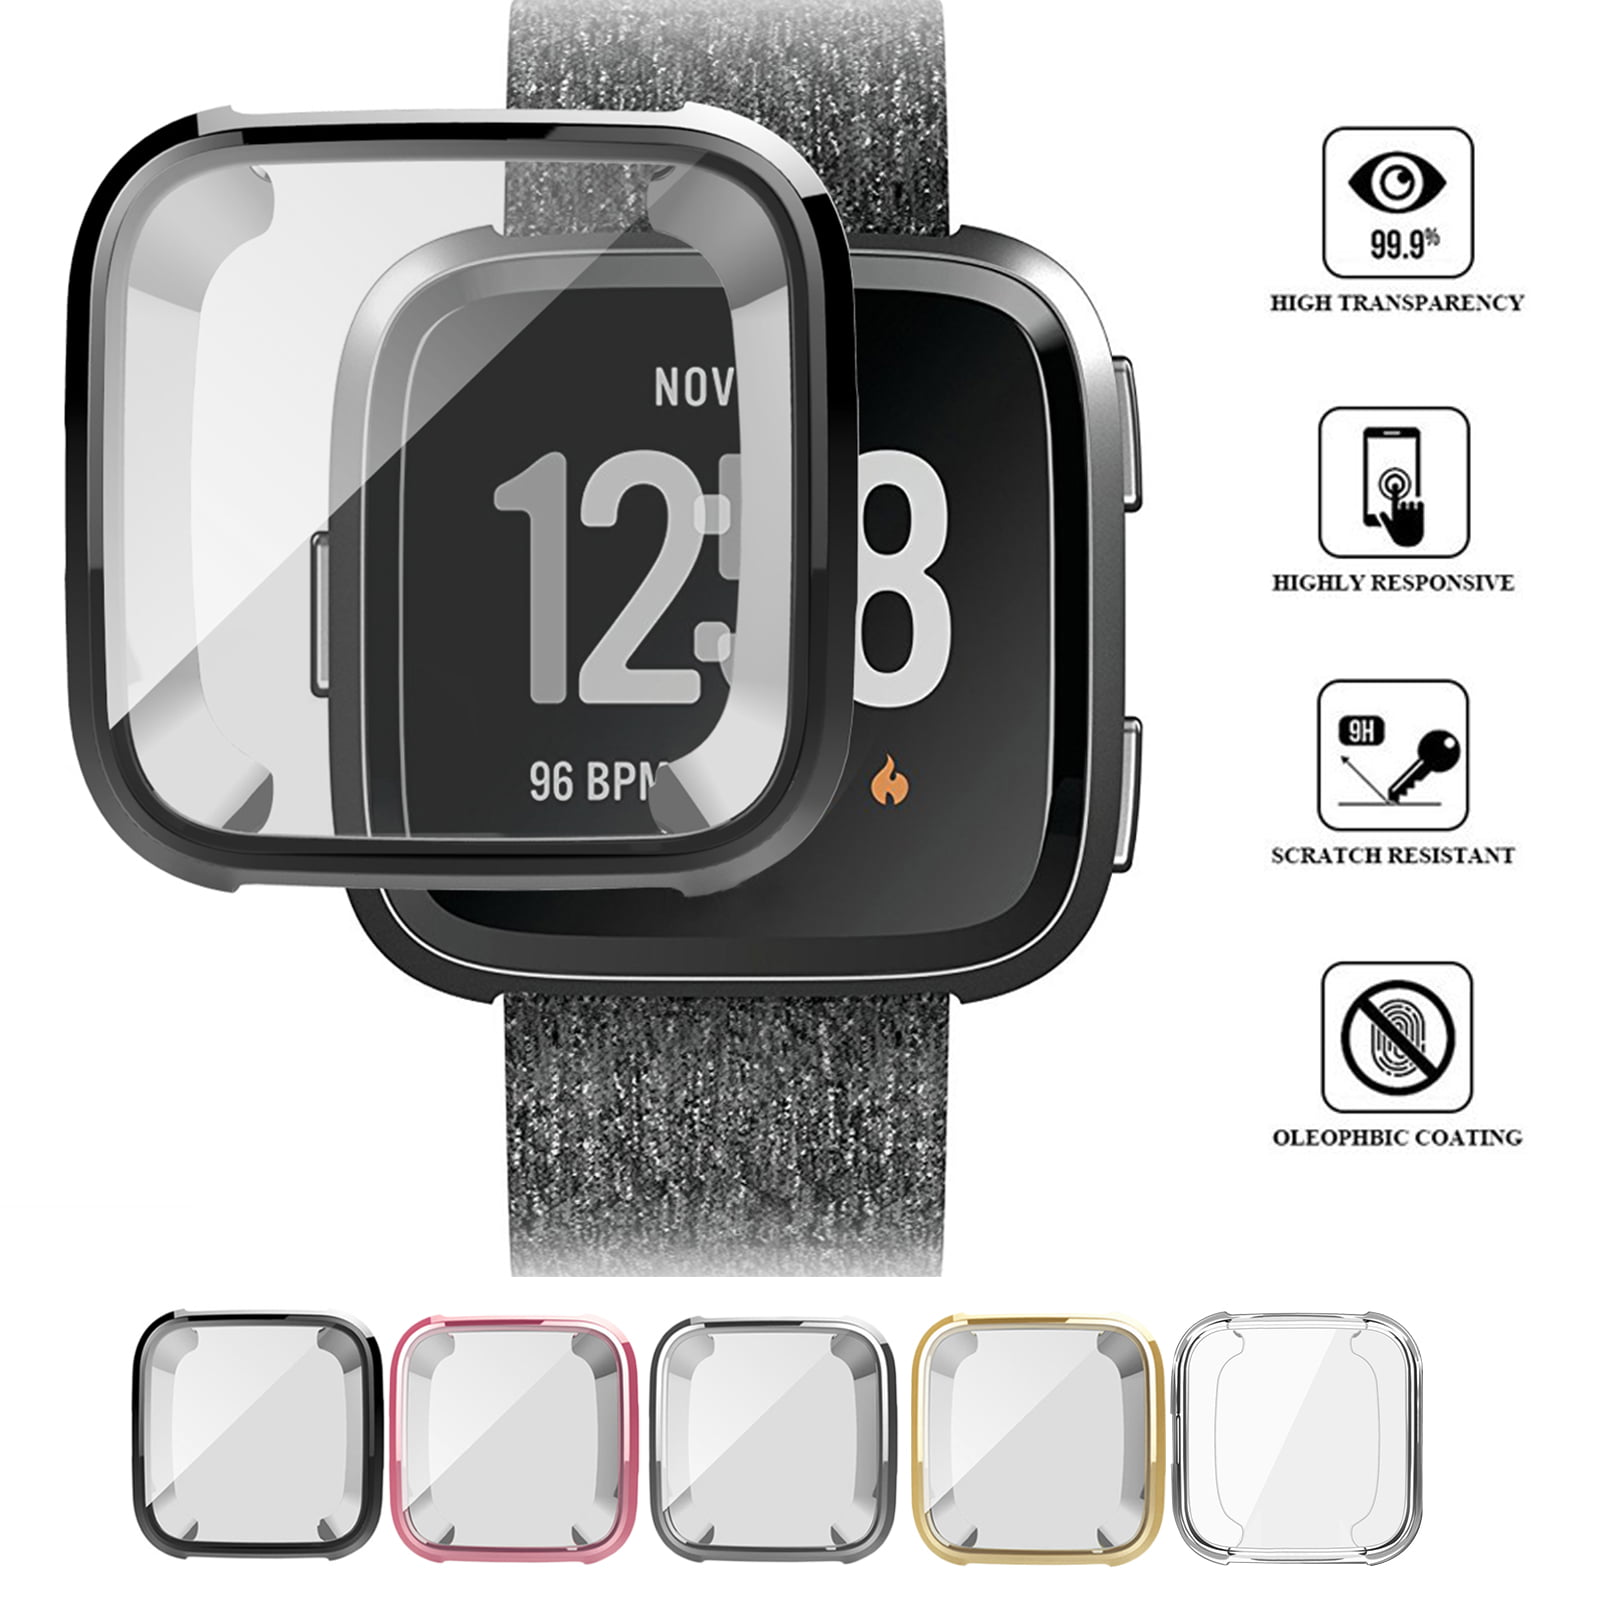 Protective TPU Silicone Shell Case Frame Cover Screen Protector For Fitbit Versa 